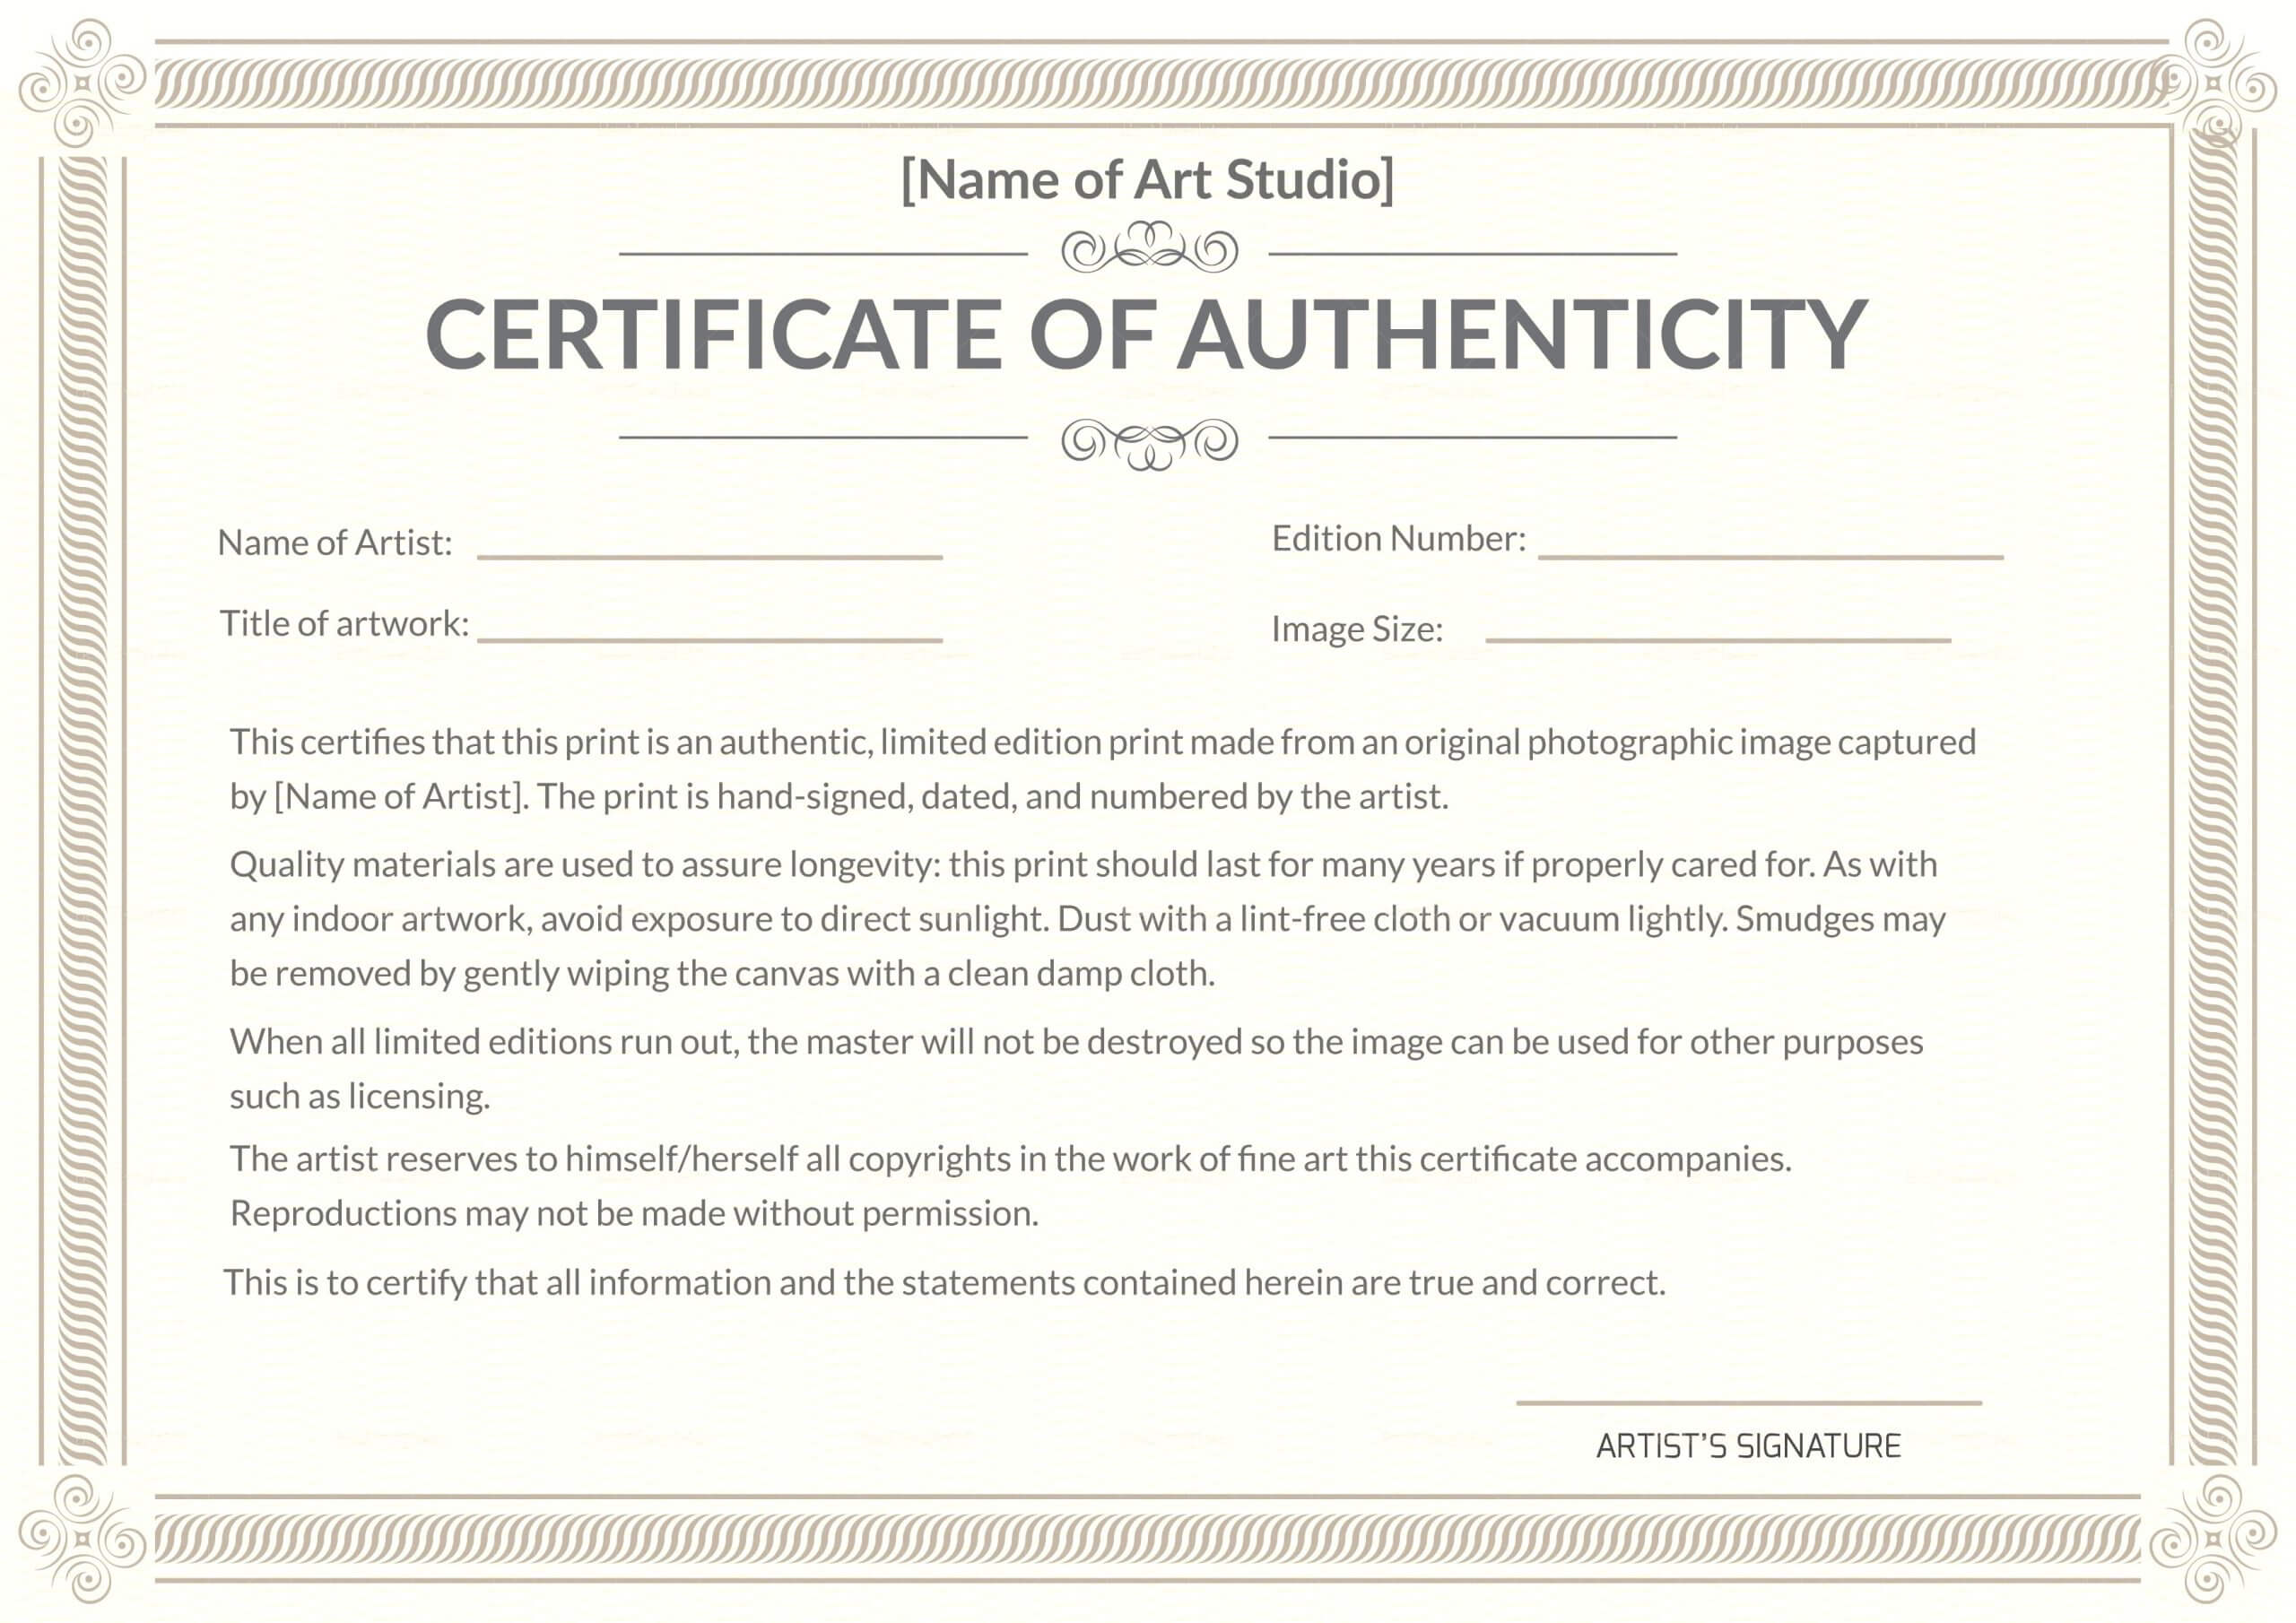 Certificate Of Authenticity Template Photoshop Fine Art Free With Regard To Certificate Of Authenticity Photography Template